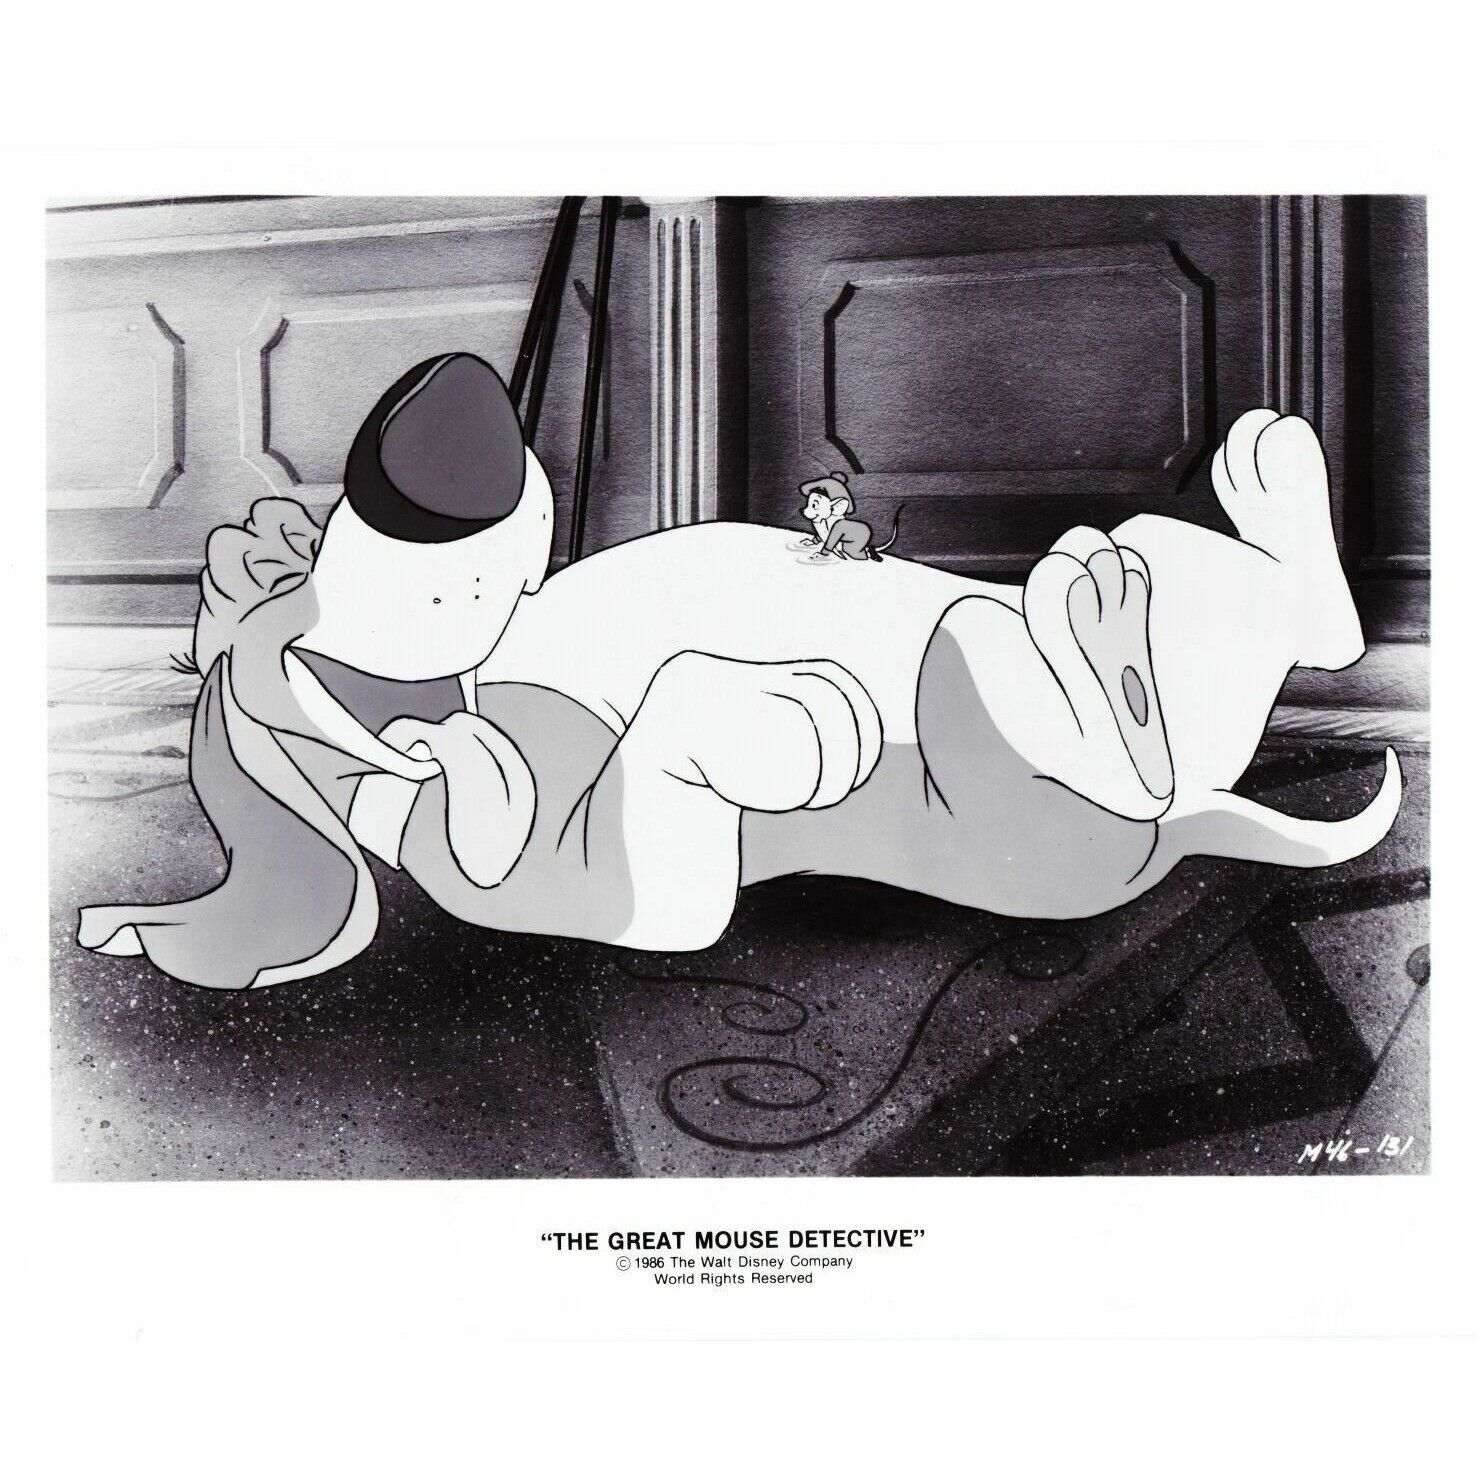 Toby The Dog Promo Photograph Disney The Great Mouse Detective 1986 8x10